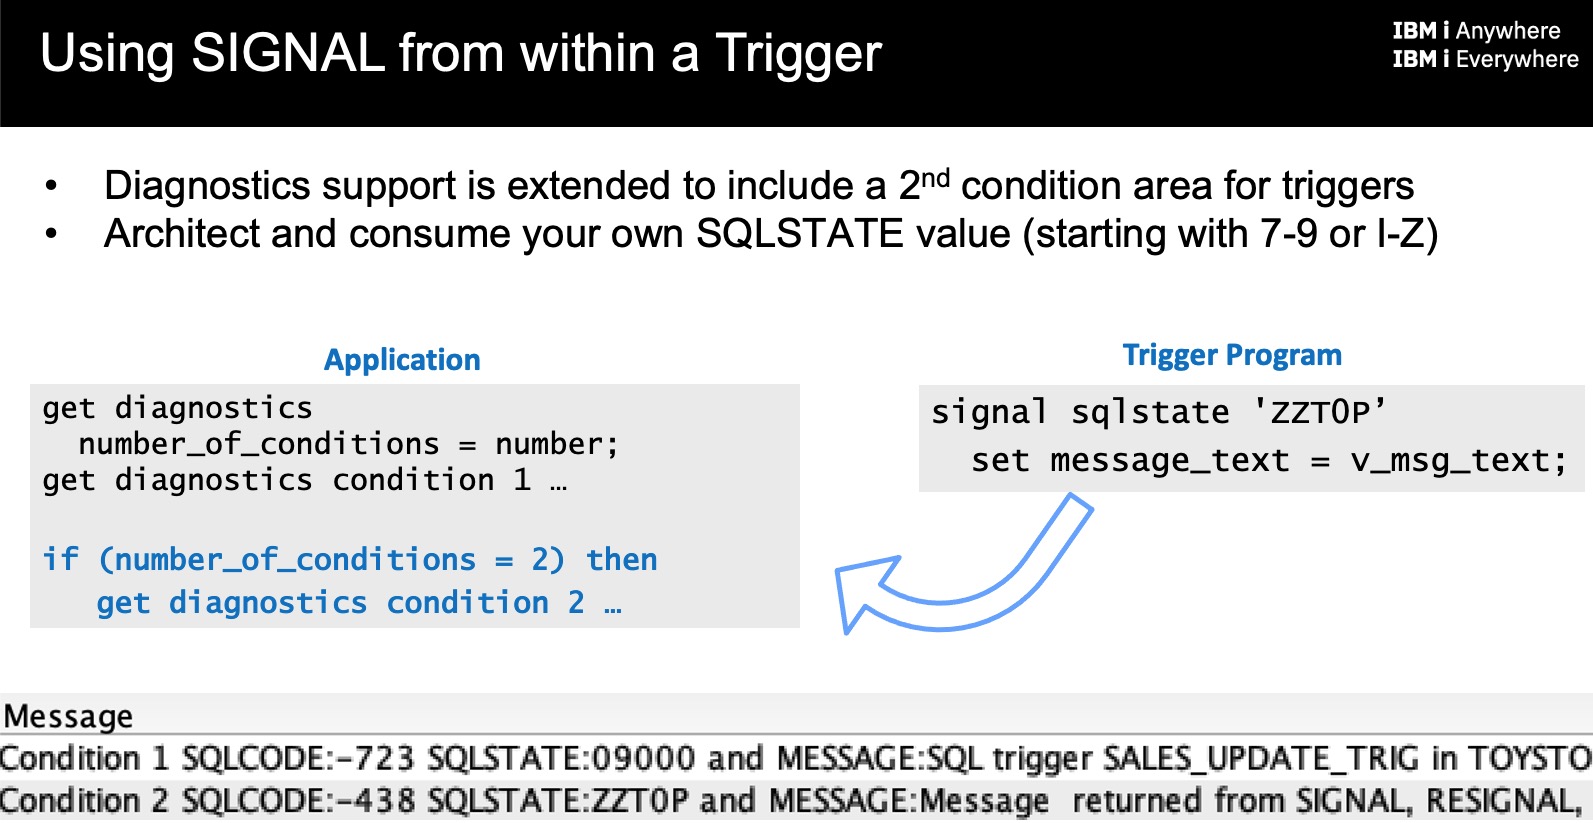 Signalled SQLSTATE from within a trigger can now be consumed by the application